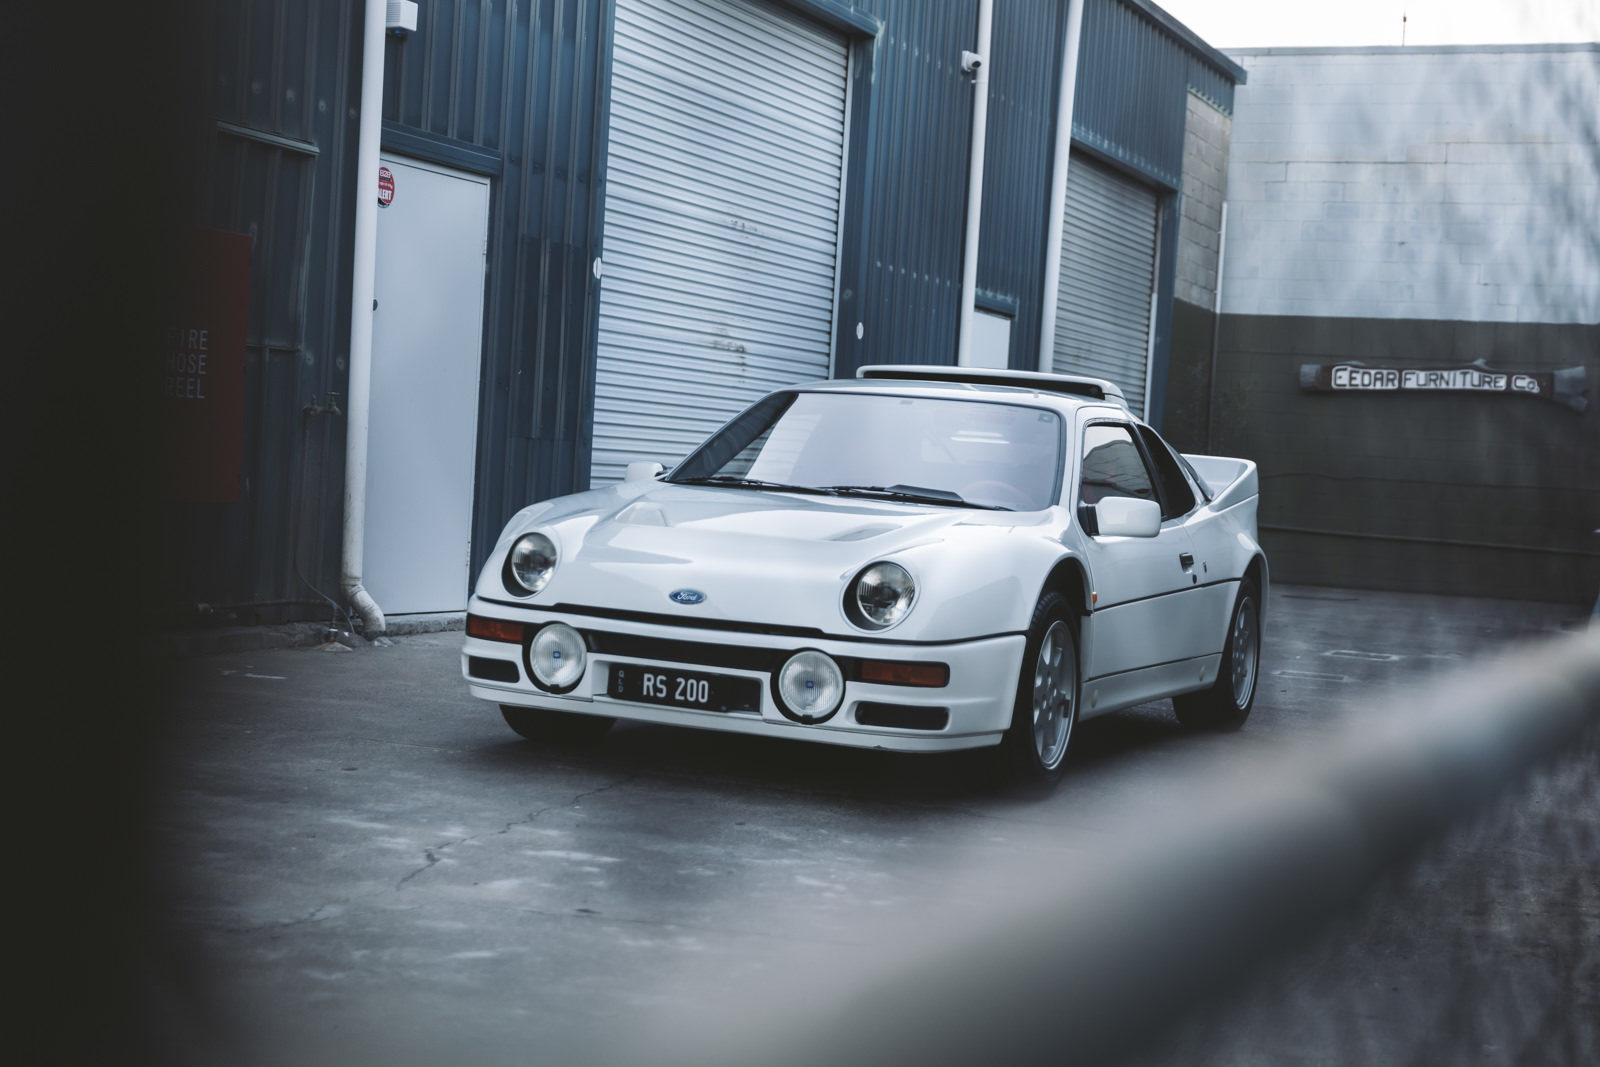 cigar fredelig Blive gift The Ford RS200 - The Fastest Accelerating Road Car In The World (For 12  Years)